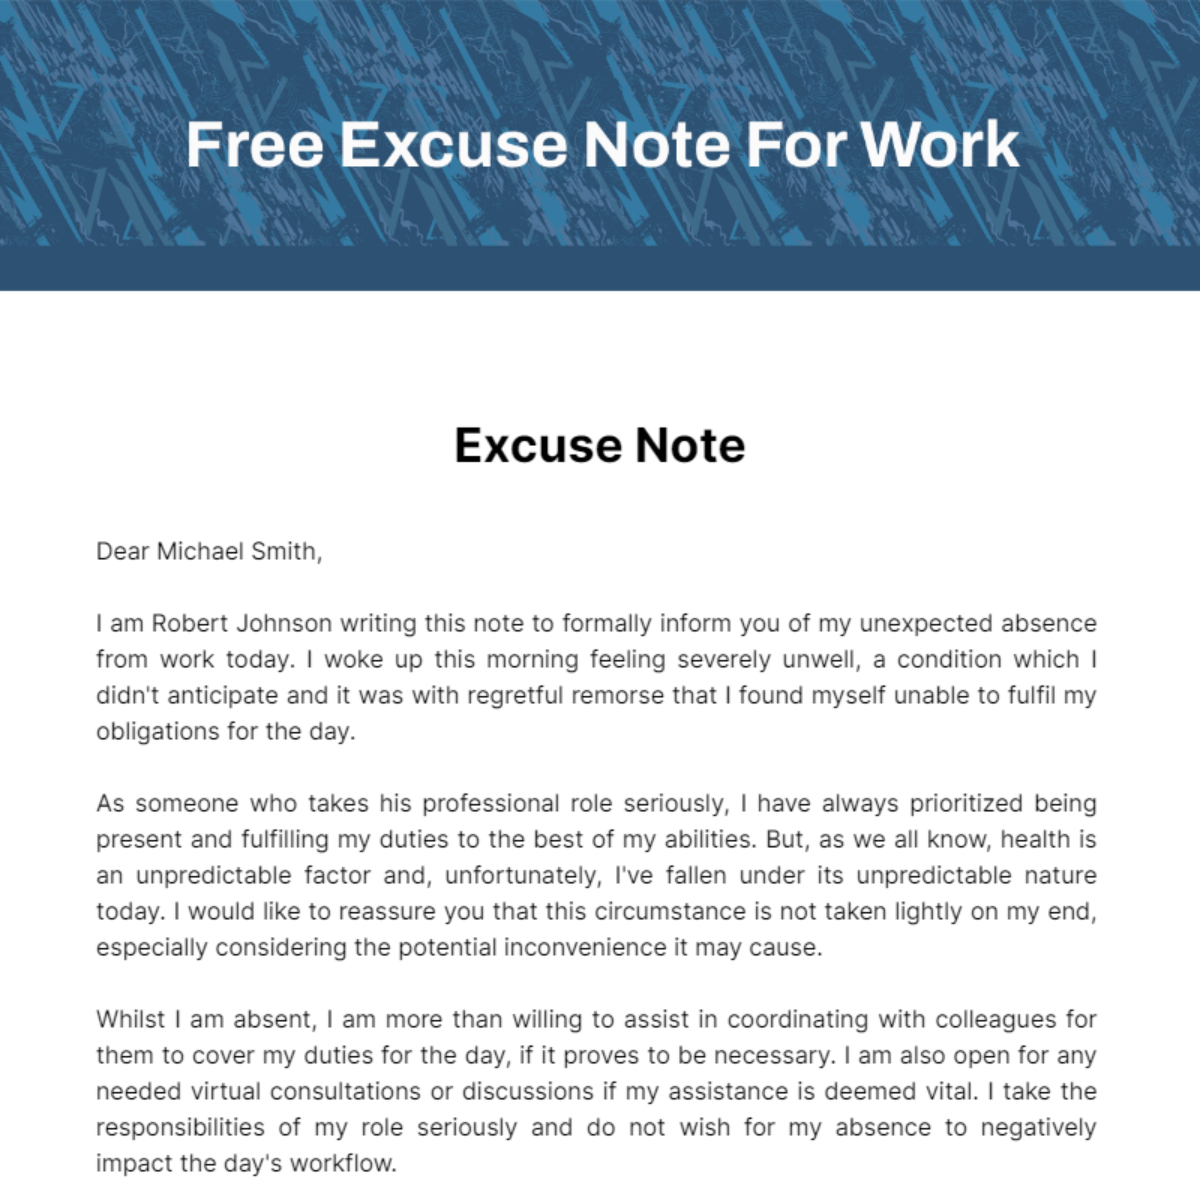 Free Excuse Note For Work Template